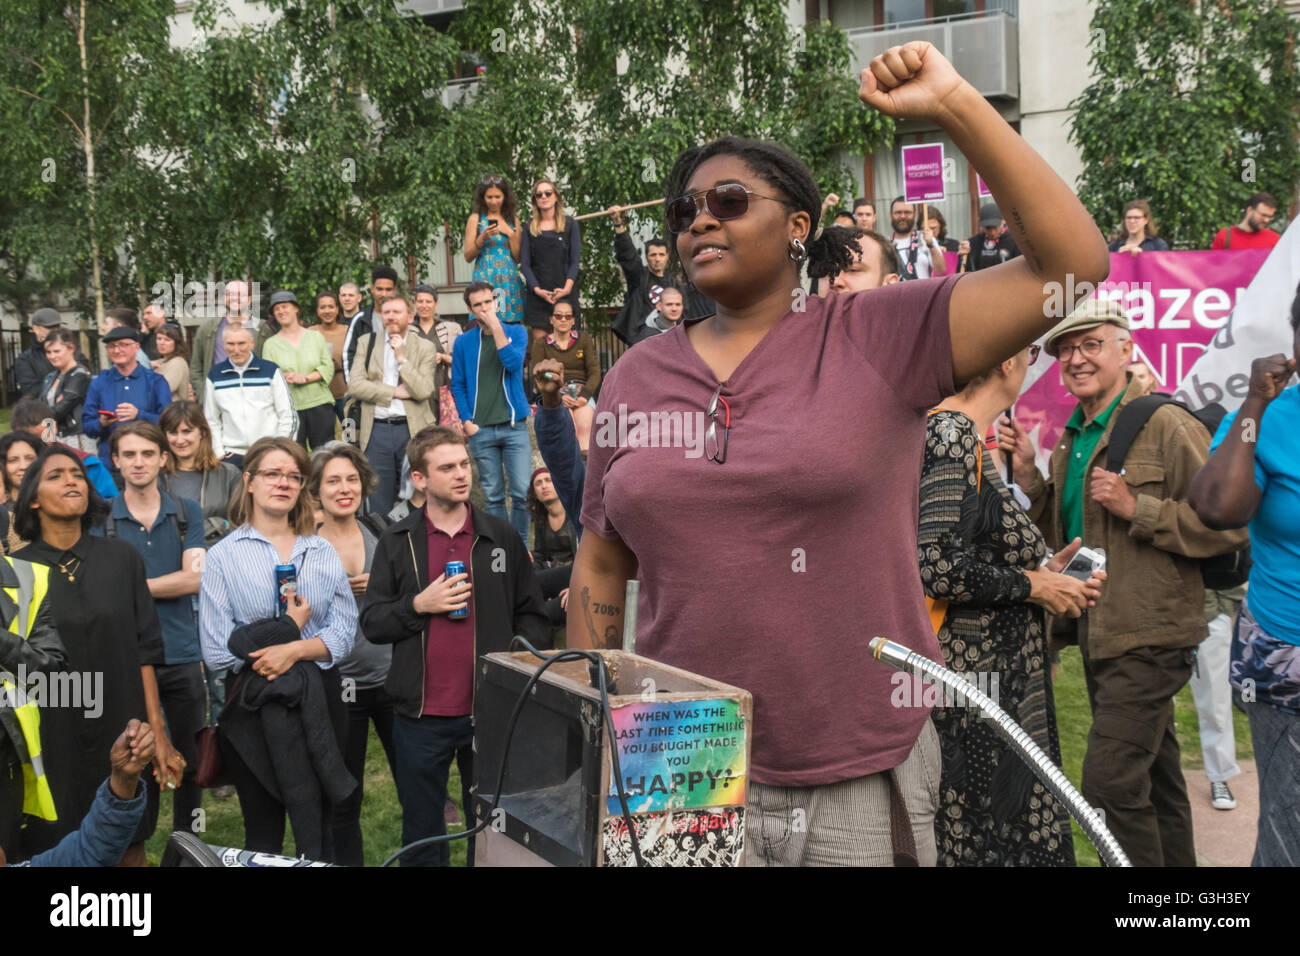 London, UK. June 24th 2016. A Black activist makes the closing speech at the rally in Altab Ali Park on the day after the UK voted to leave the EU against racism, for migrant rights and against fascist violence. They say that migration and immigrants have been attacked and scapegoated not only by both Remain and Leave campaigns but by mainstream parties and media over more than 20 years, stoking up hatred by insisting immigrants are a 'problem'. Peter Marshall/Alamy Live News Stock Photo